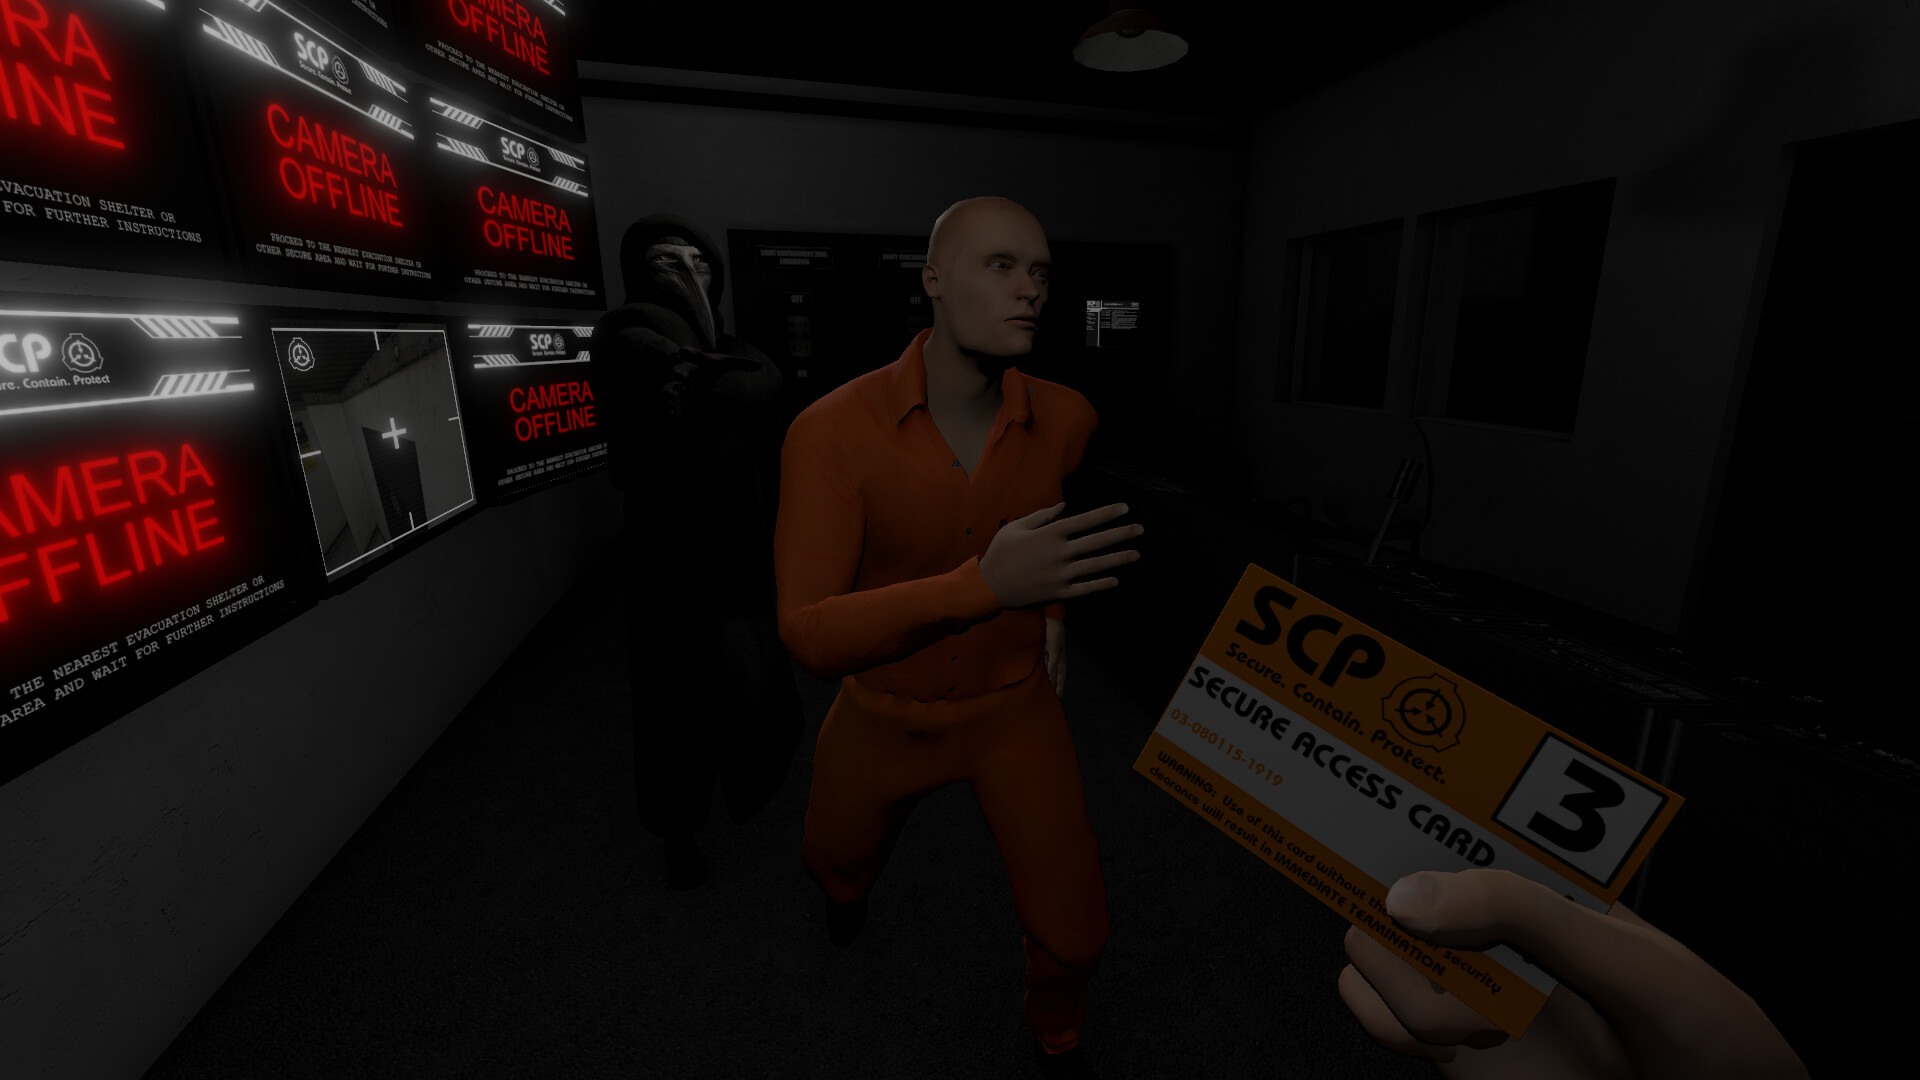 How to play SCP Containment Breach Multiplayer (Up to date) : r